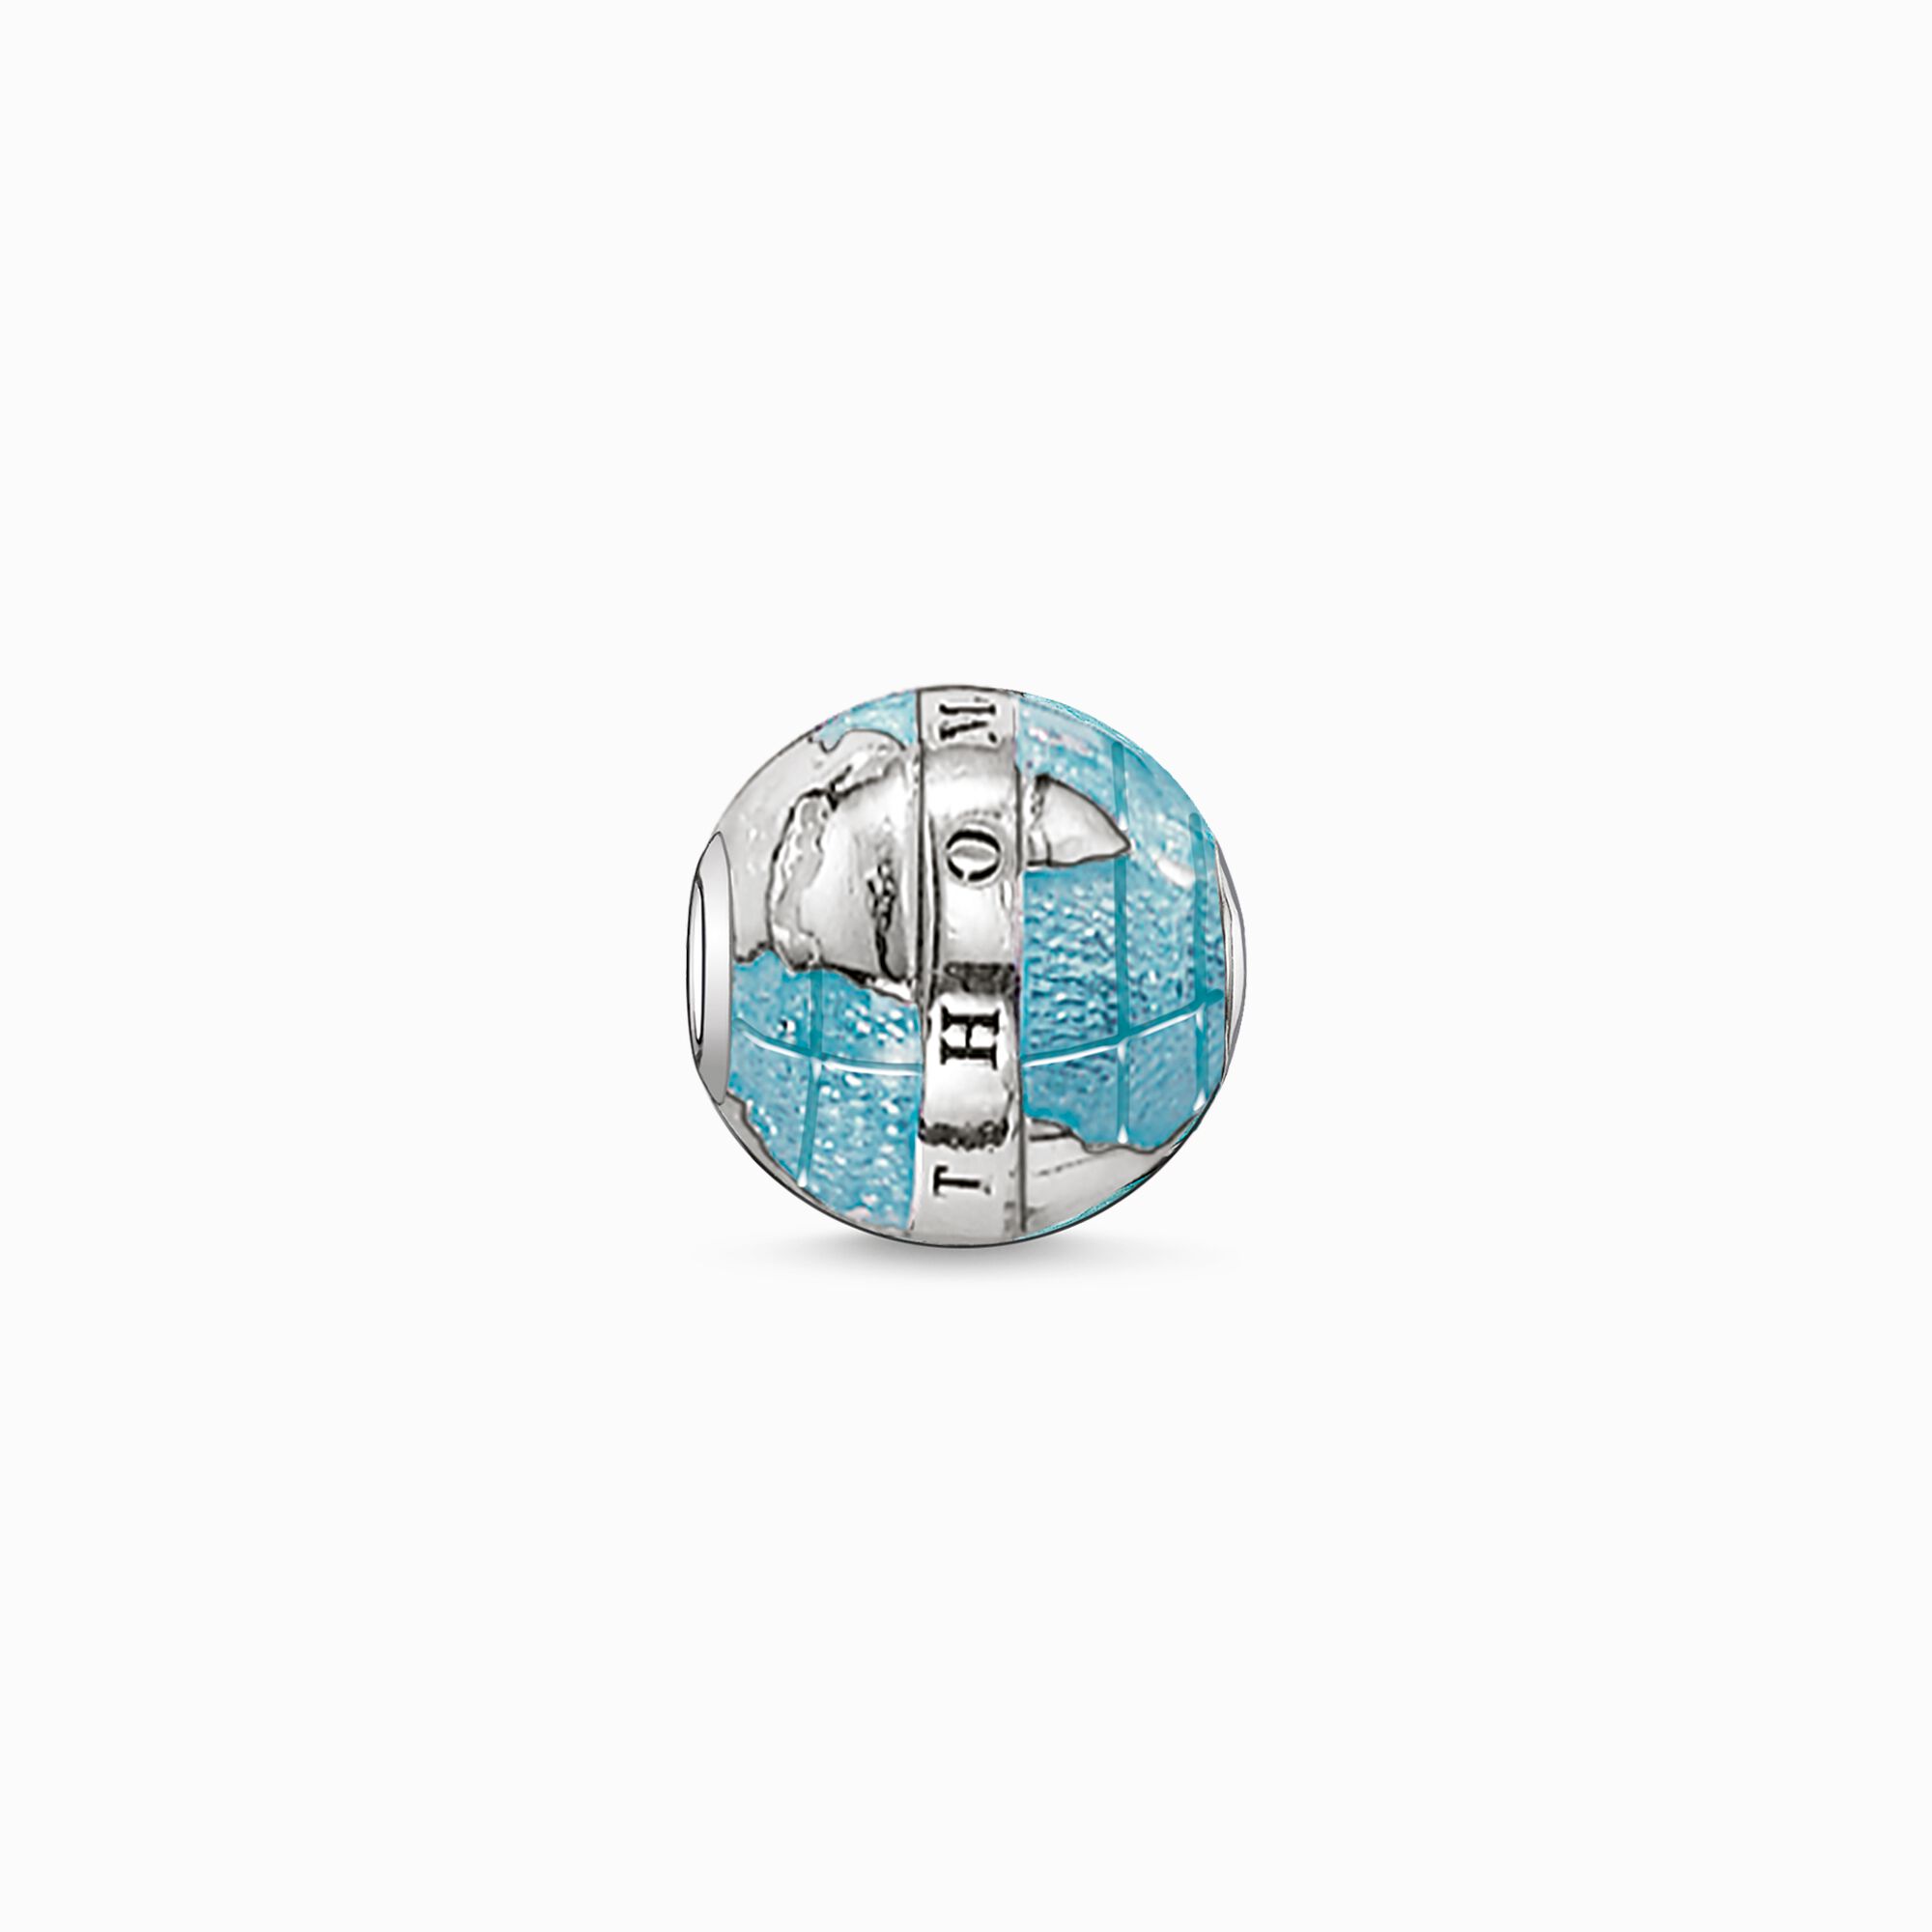 Bead Wonderful World from the Karma Beads collection in the THOMAS SABO online store